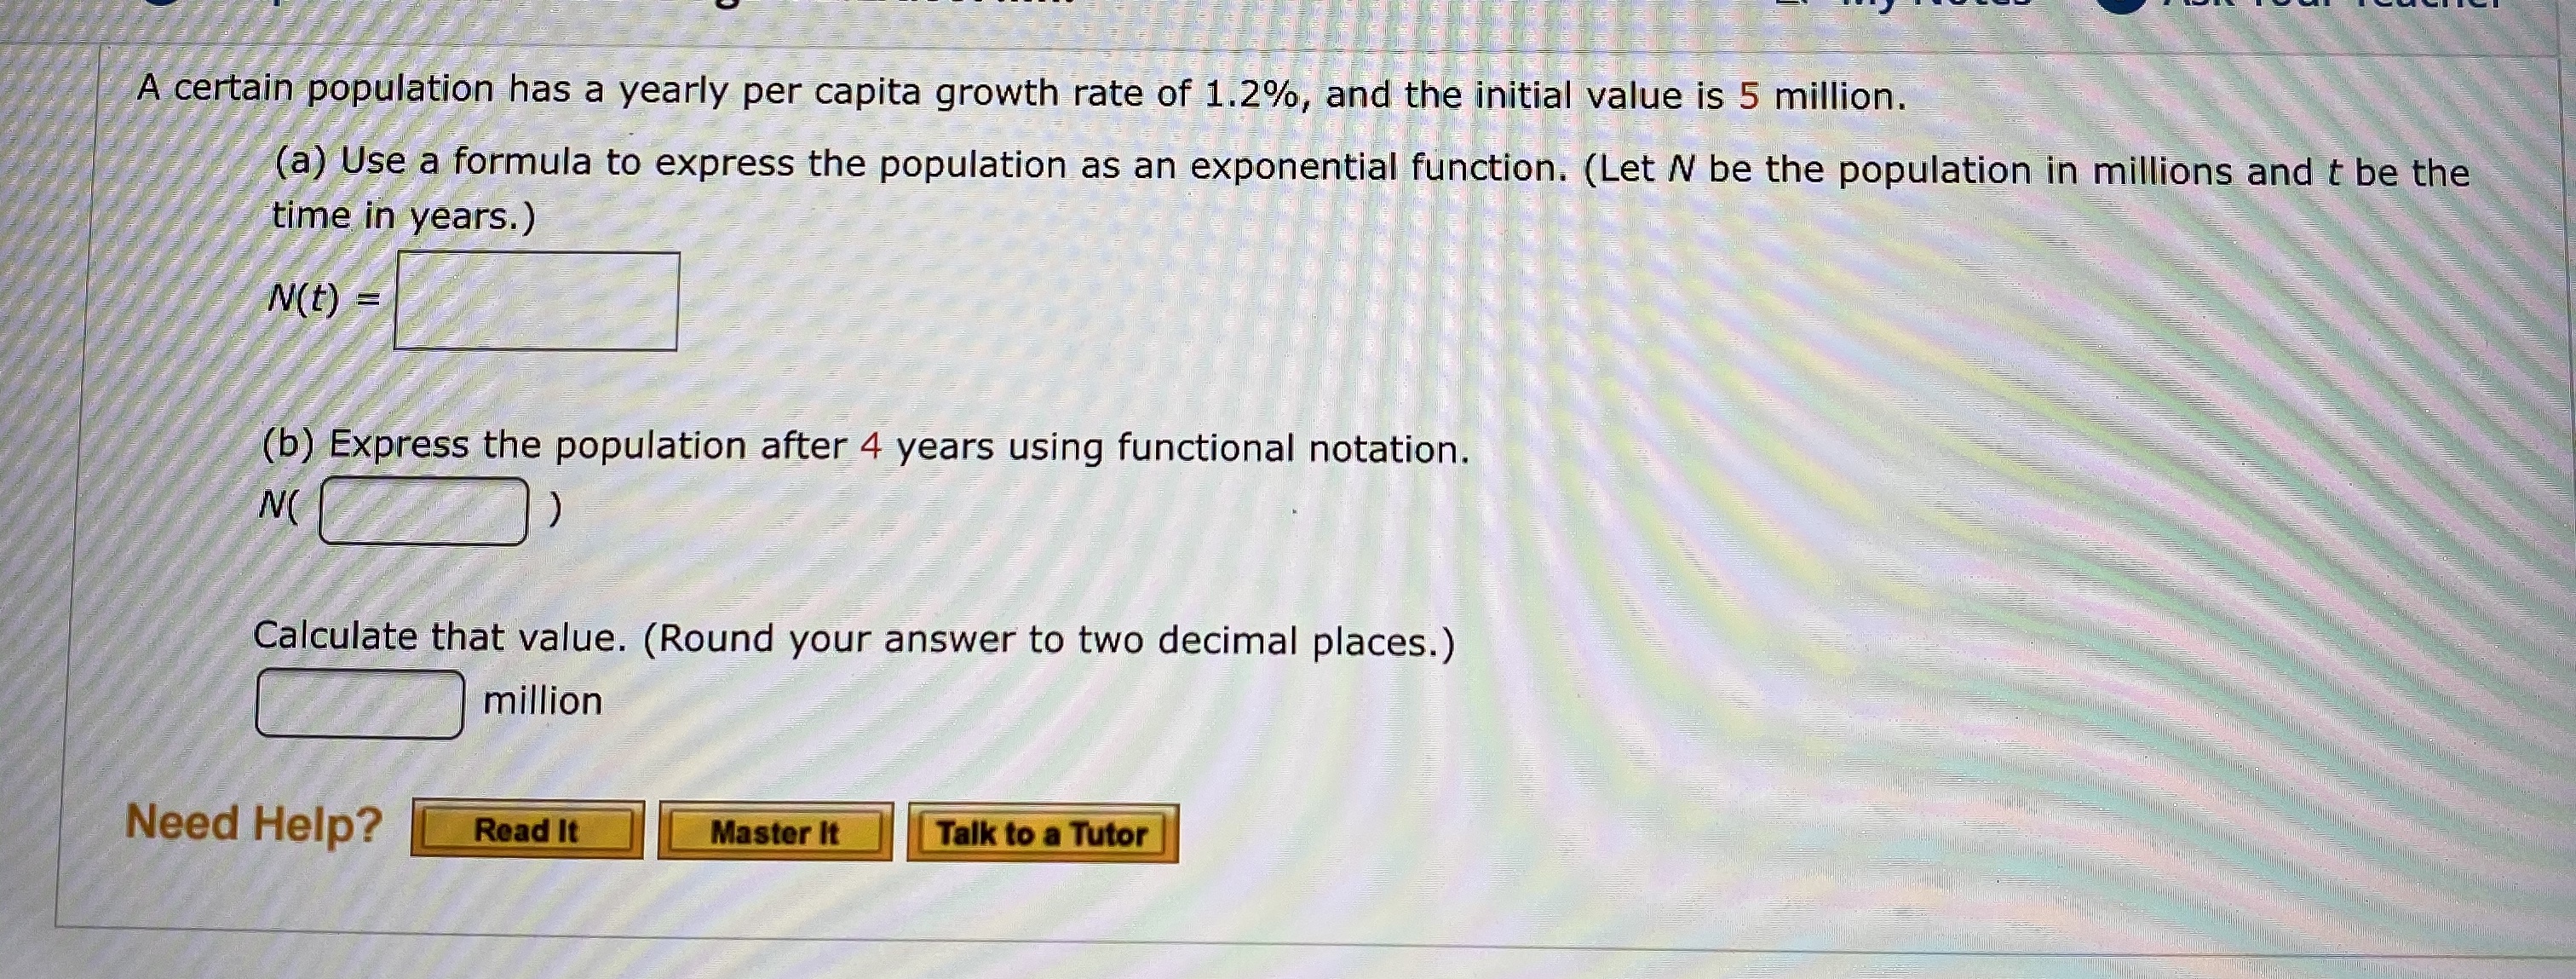 A certain population has a yearly per capita growth rate of 1.2%, and the initial value is 5 million.
(a) Use a formula to express the population as an exponential function. (Let N be the population in millions and t be the
time in years.)
N(t)
(b) Express the population after 4 years using functional notation.
N(
Calculate that value. (Round your answer to two decimal places.)
million
Need Help?
Read It
Talk to a Tutor
Master It
